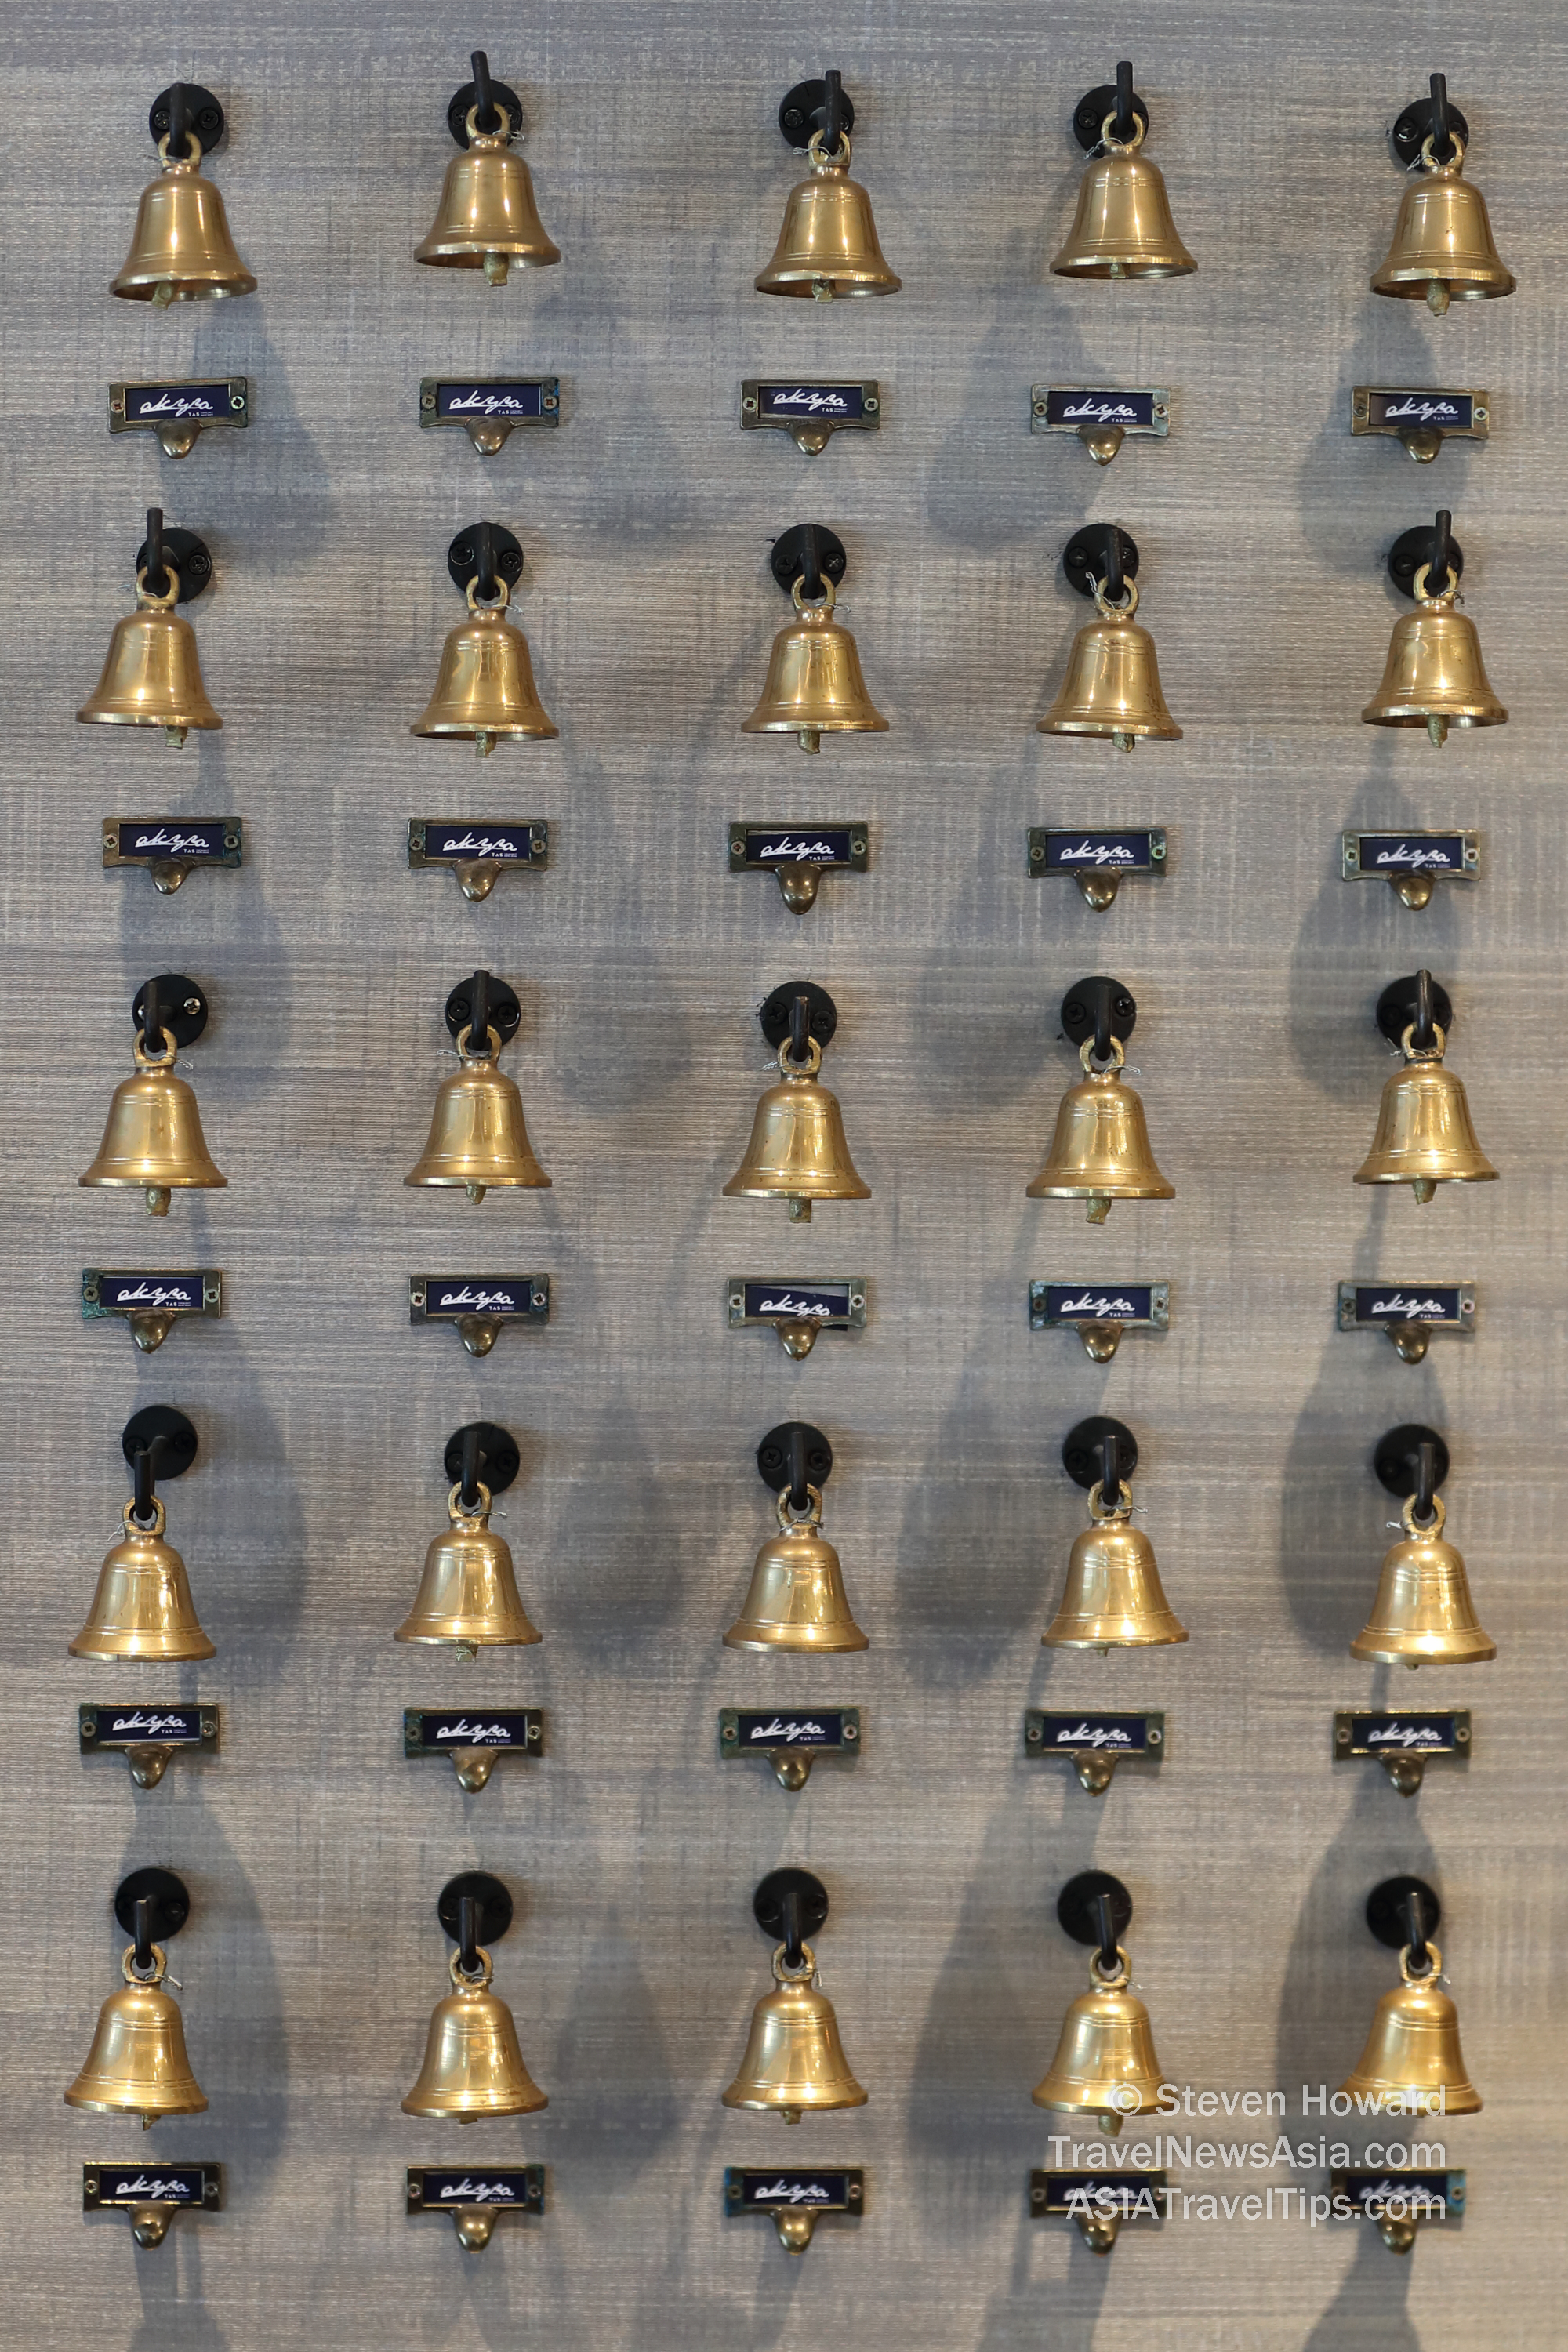 Bells at akyra TAS Sukhumvit. Picture by Steven Howard of TravelNewsAsia.com Click to enlarge.